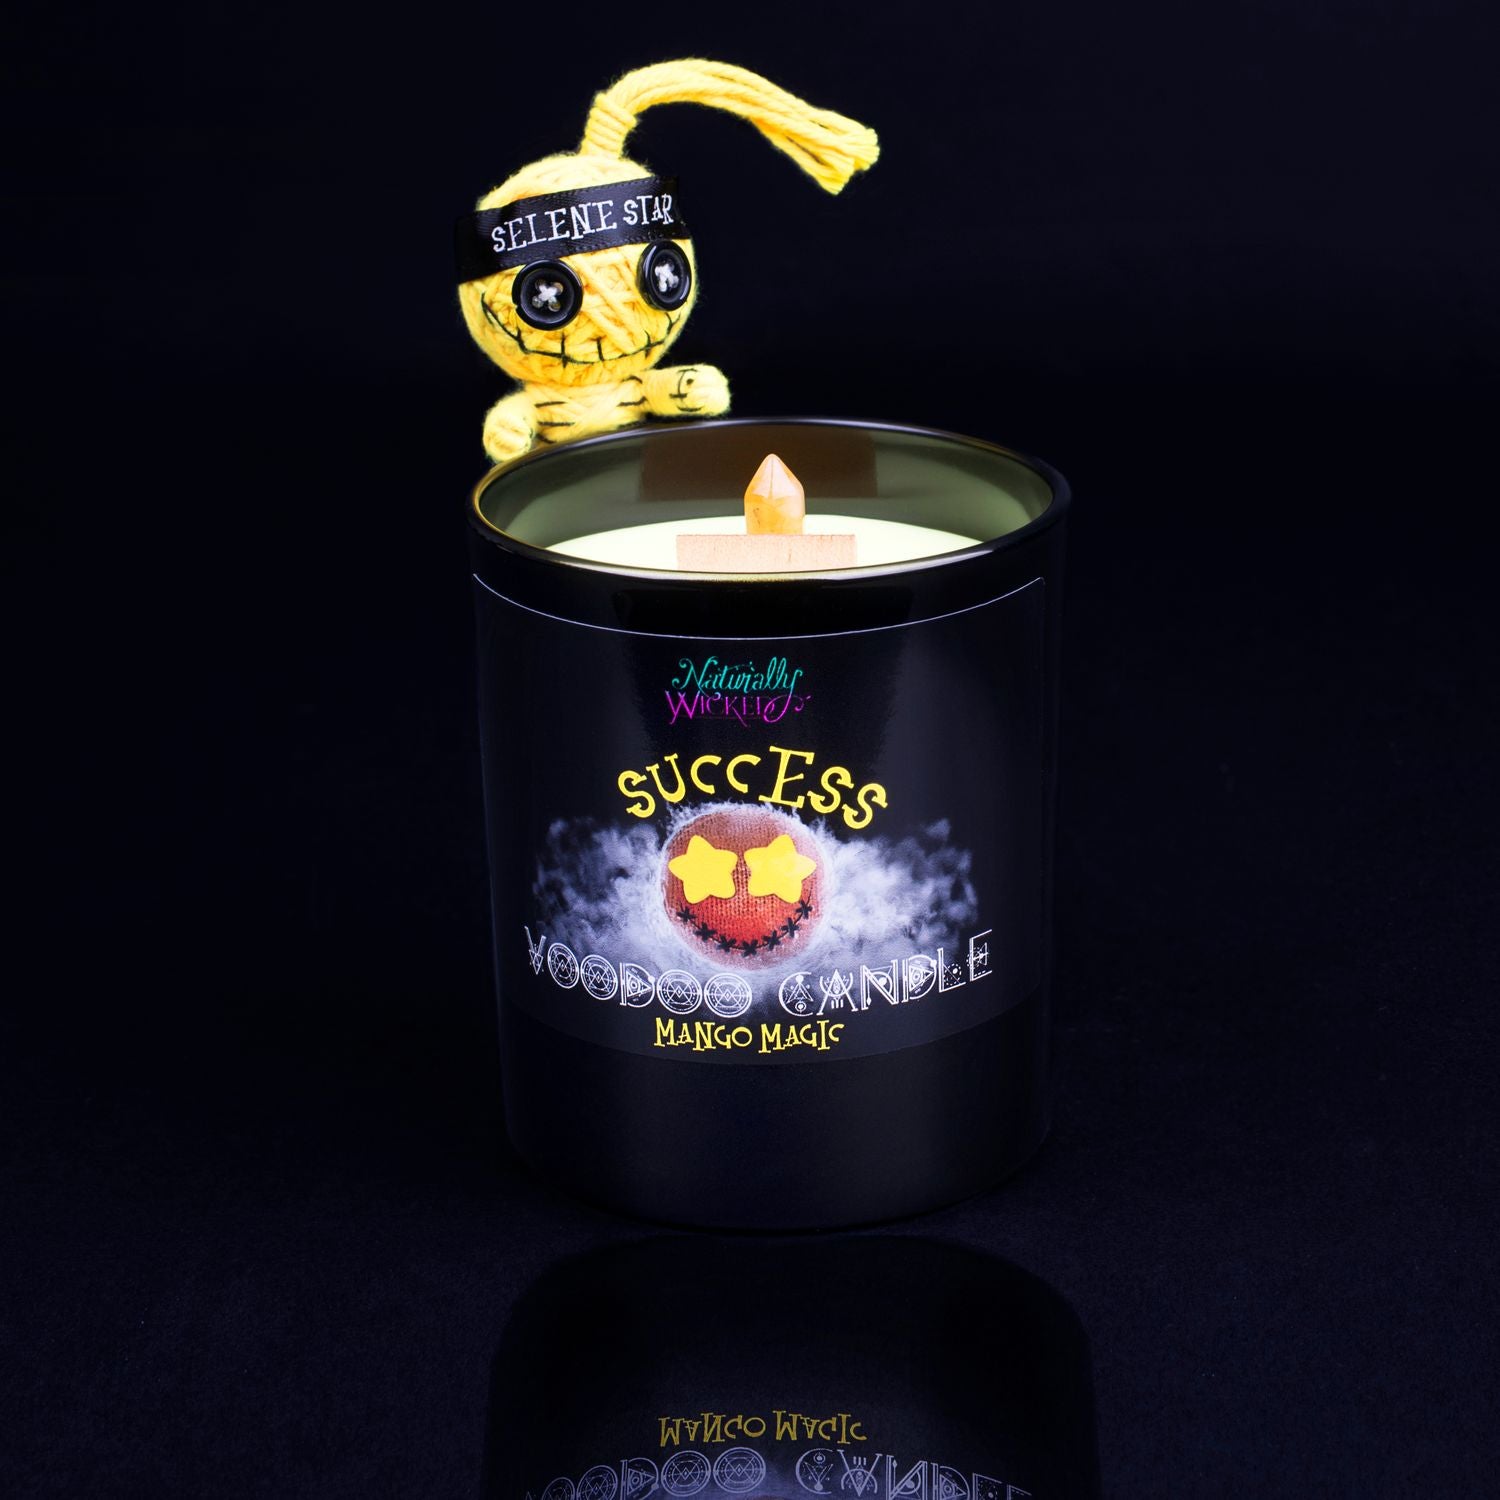 Naturally Wicked Voodoo Success Crystal Candle Entombed In Yellow Plant-Based Wax With Crackling Wood Wick, Yellow Jade Crystal Wand & Yellow Voodoo Doll.